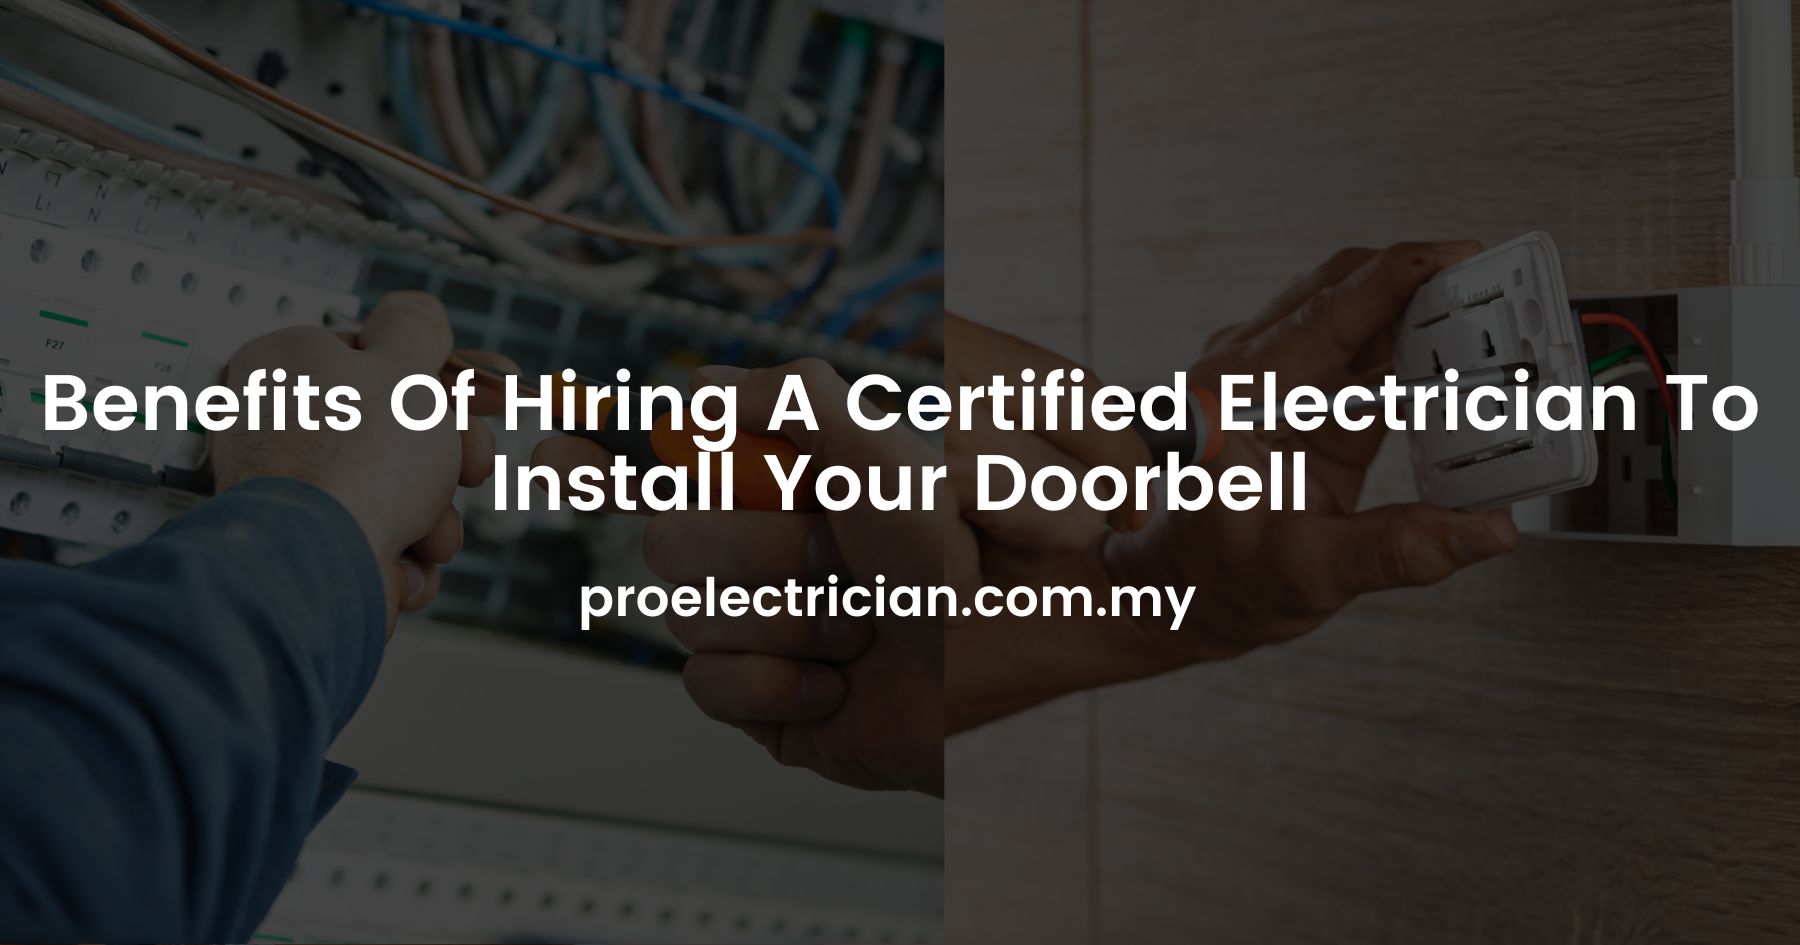 Benefits Of Hiring A Certified Electrician To Install Your Doorbell